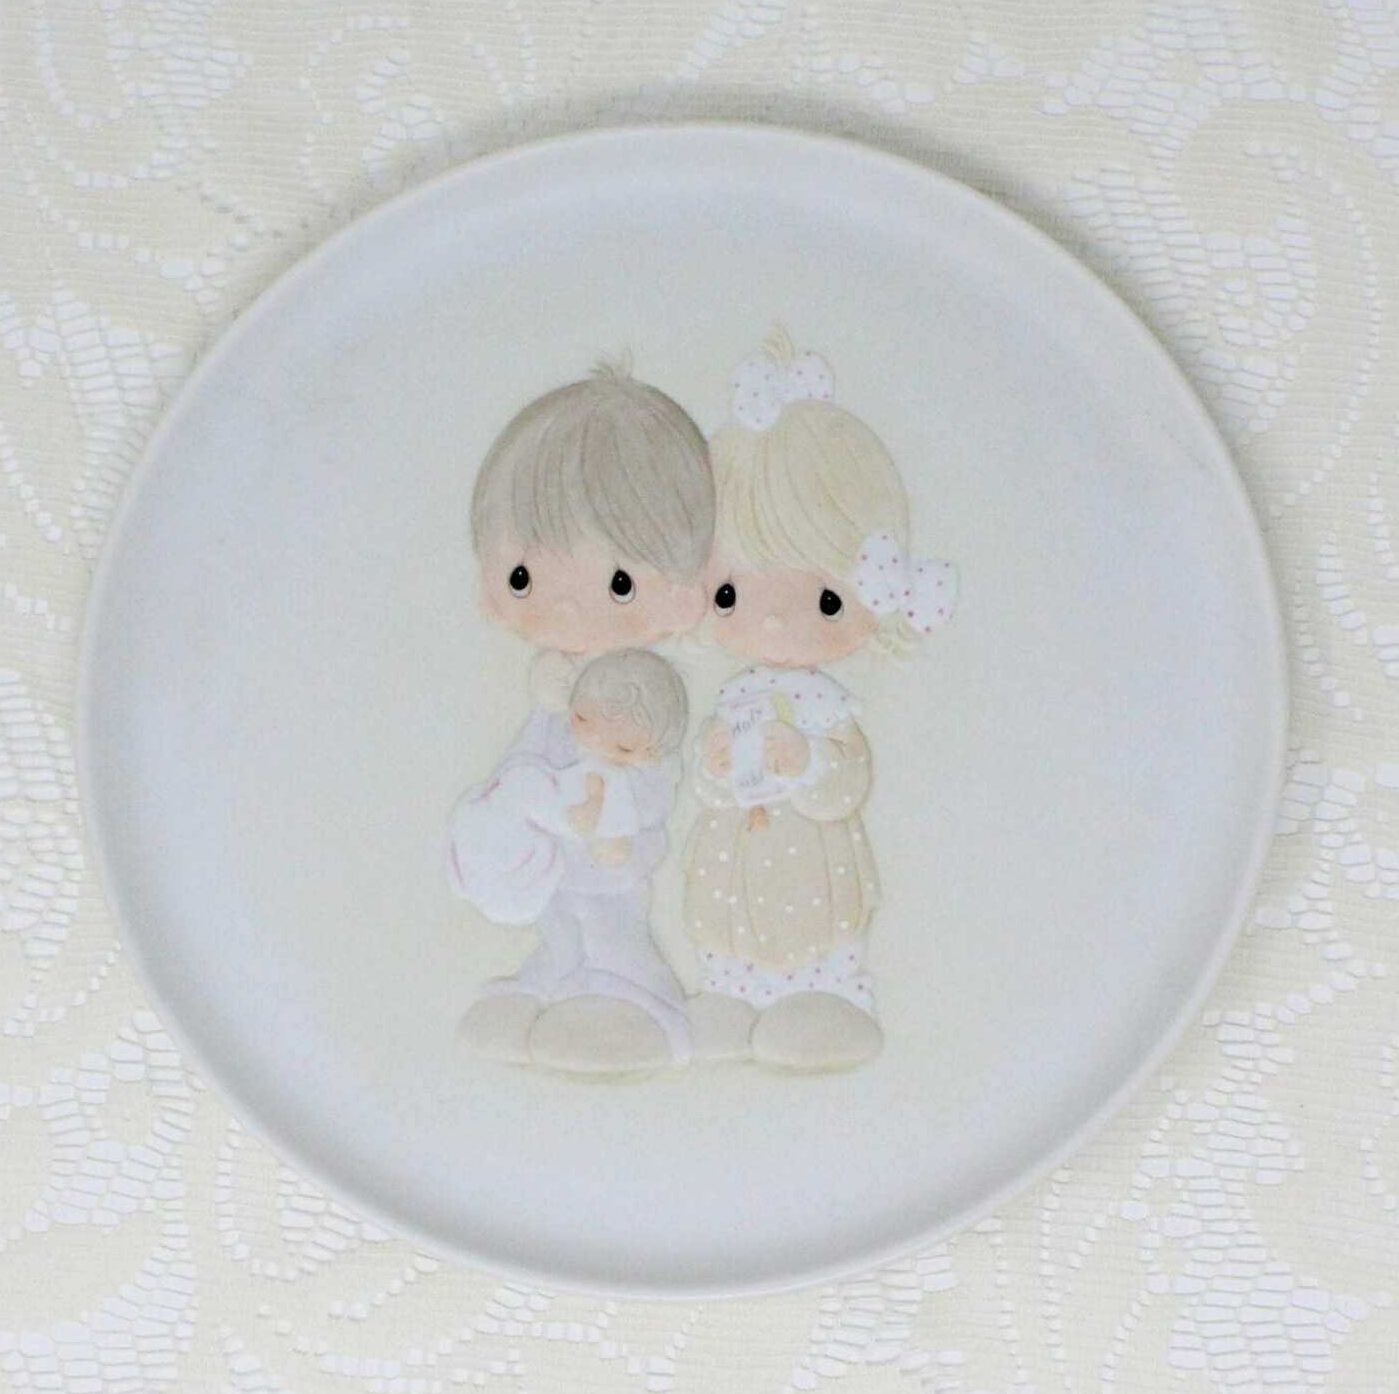 Decorative Plate, Enesco, Precious Moments, Rejoicing With You, Vintage 1981, SOLD